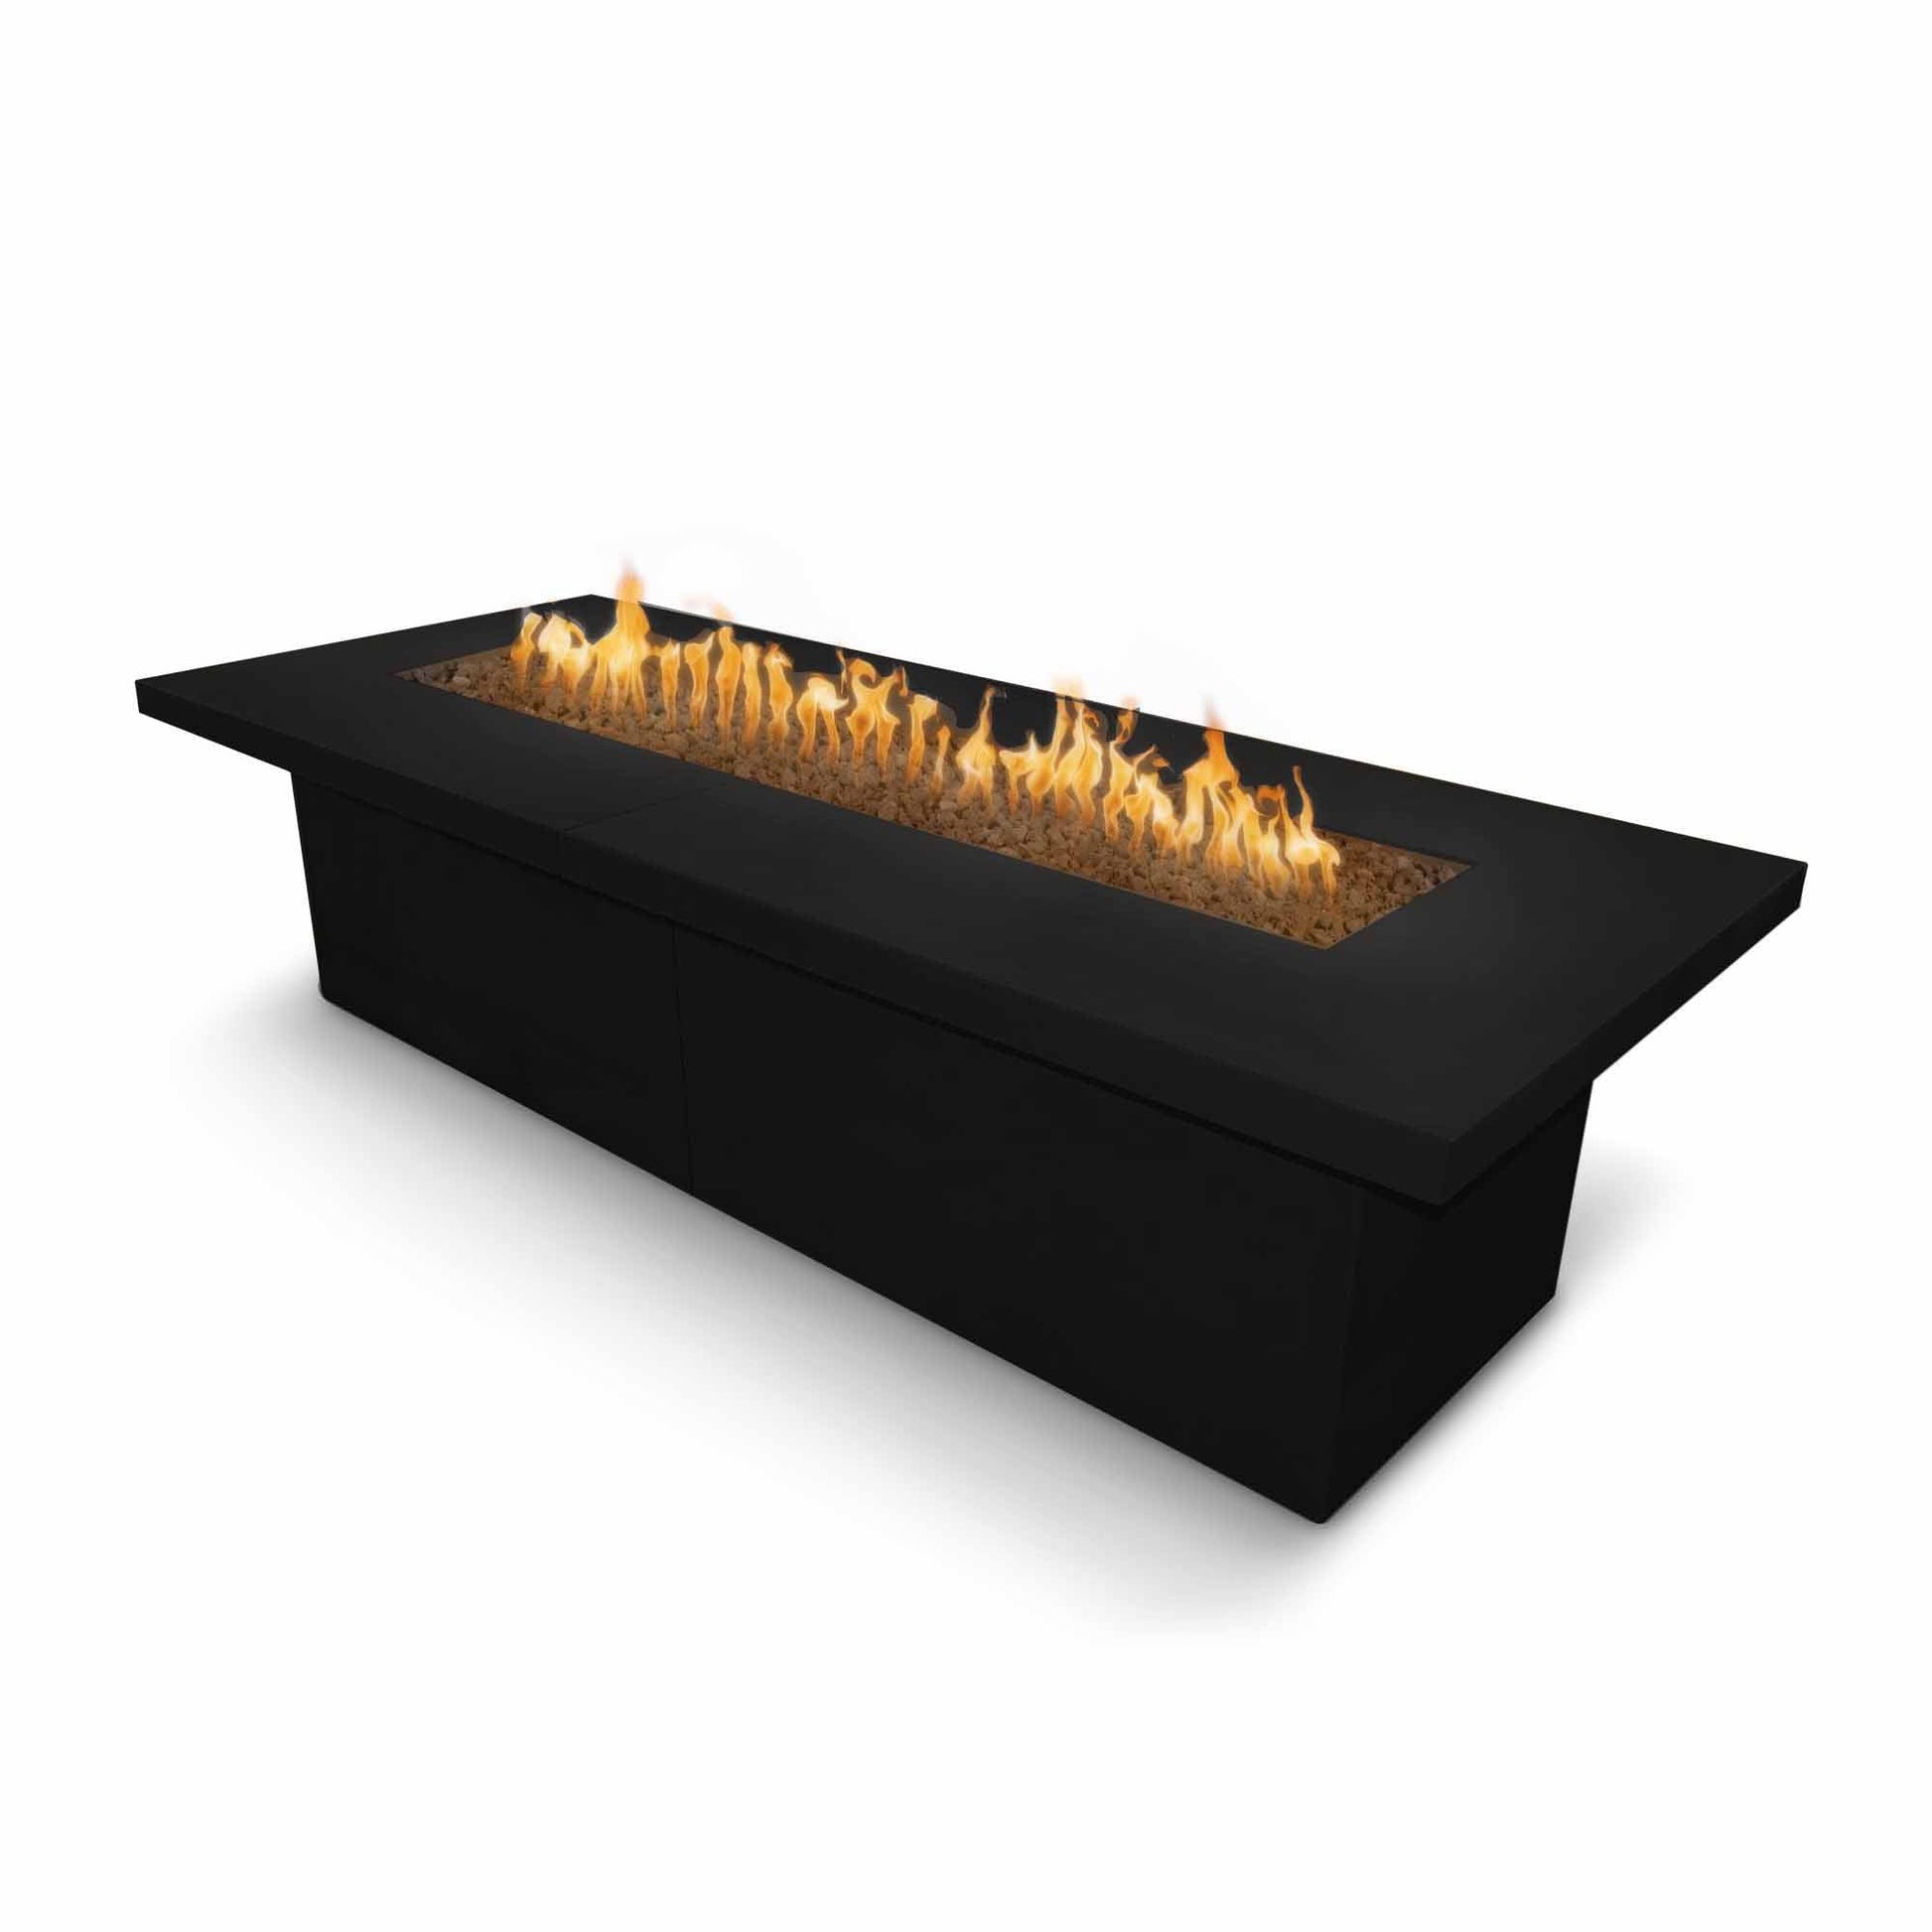 The Outdoor Plus Rectangular Newport 120" Corten Steel Natural Gas Fire Pit with 110V Electronic Ignition